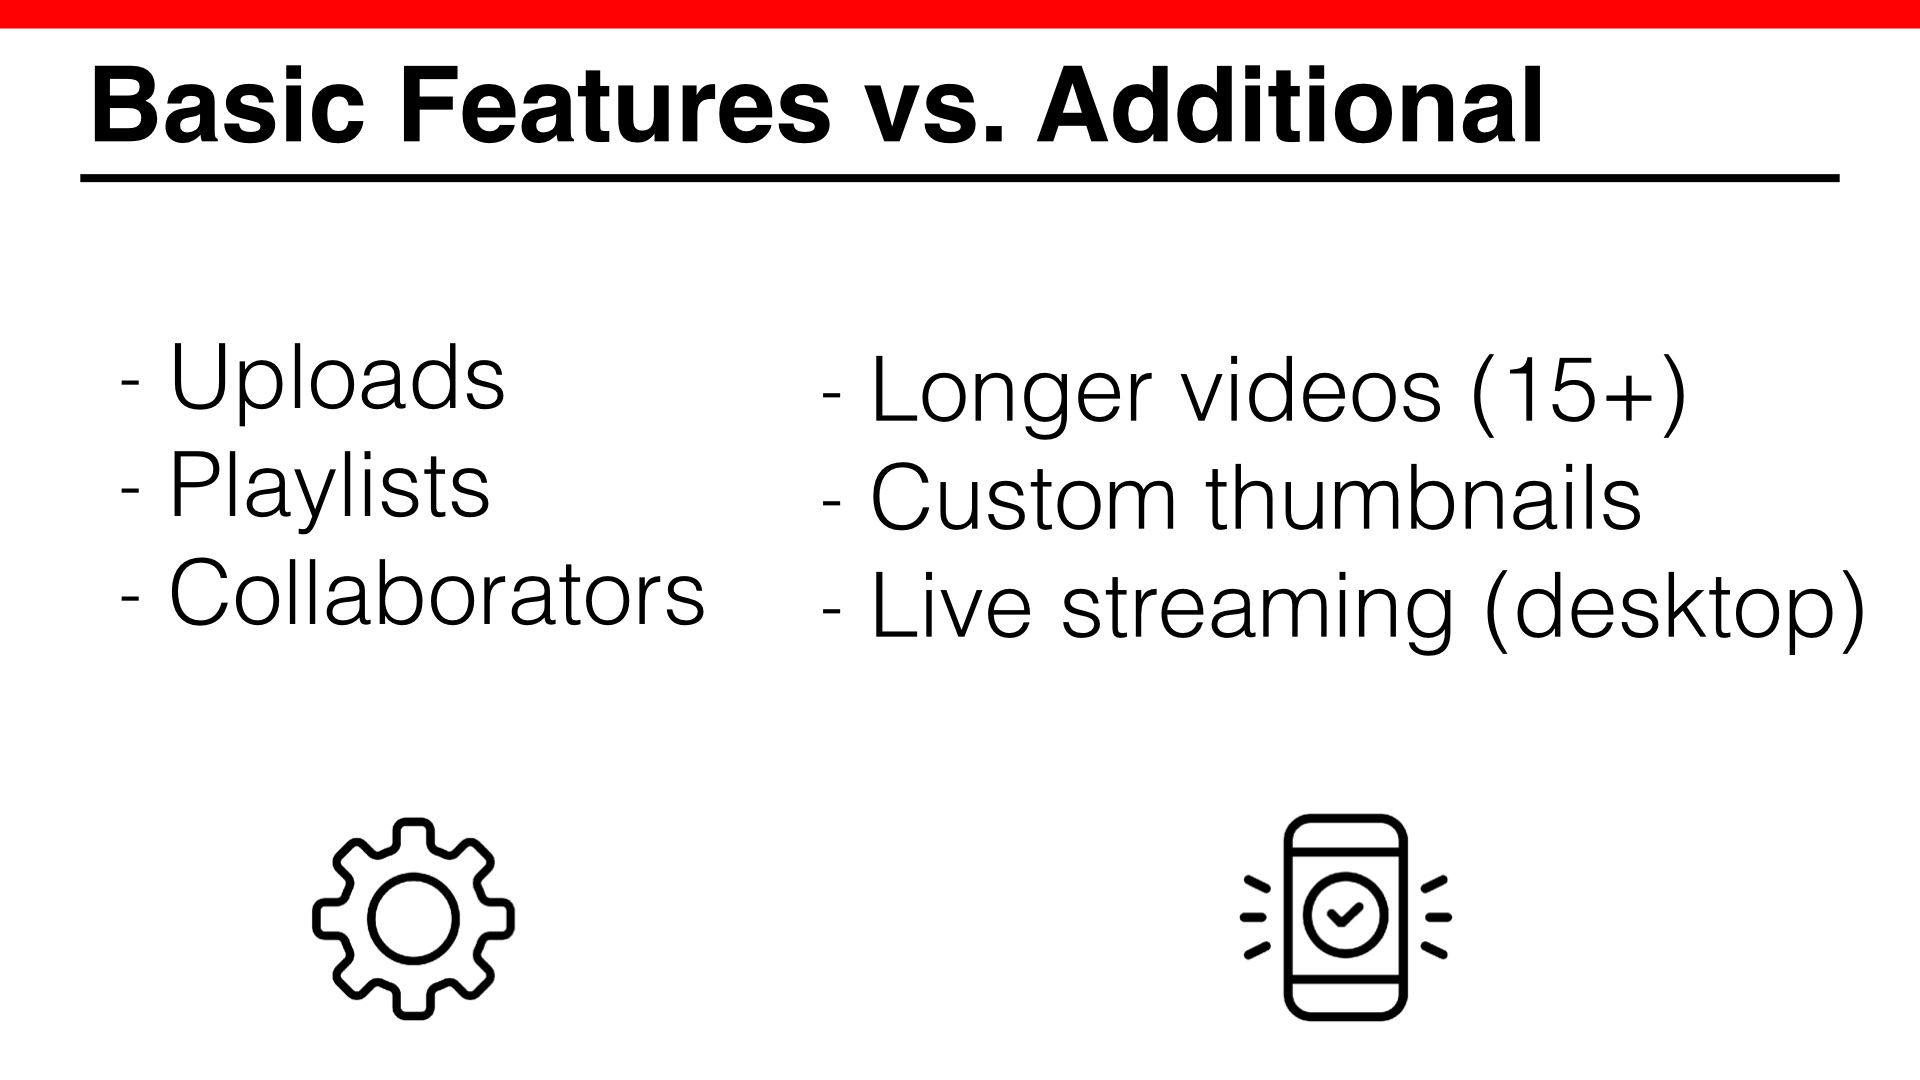 Basic Features vs. Additional, two lists, one showing that you get with basic account: Uploads, Playlists and Collaborators, and the other showingwhat you can get with phone verification: Longer videos (15+), Custom thumbnails,
Live streaming (desktop)